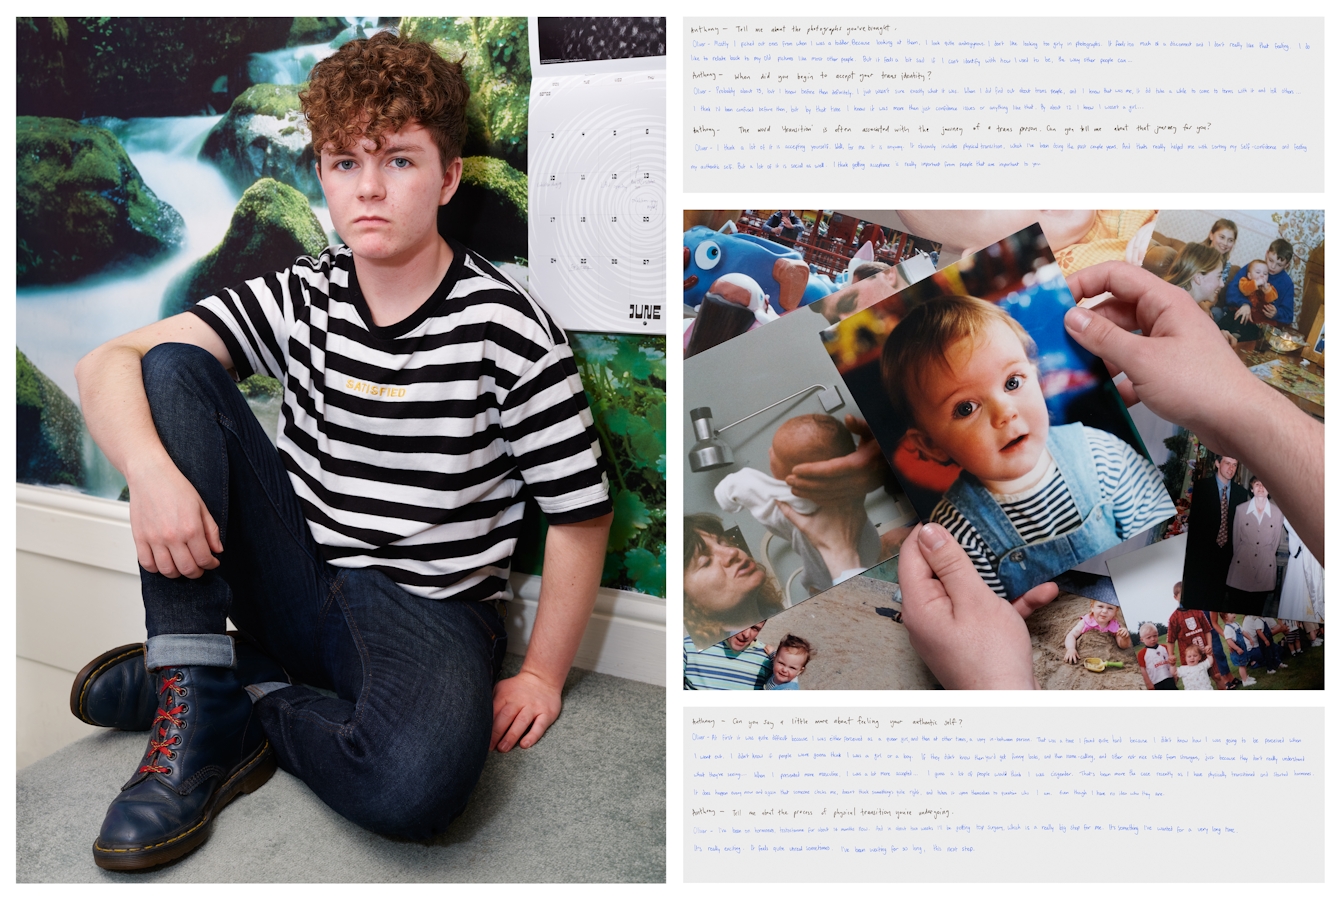 Photograph of an individual sat on the floor of a bedroom. They are looking straight to camera and behind them the wall is covered in waterfall wallpaper. To their left is a calendar hanging on the wall. To the right of this photograph is another photograph showing two hands holding a family photo of a young baby. Above and below this image are images of handwritten texts.